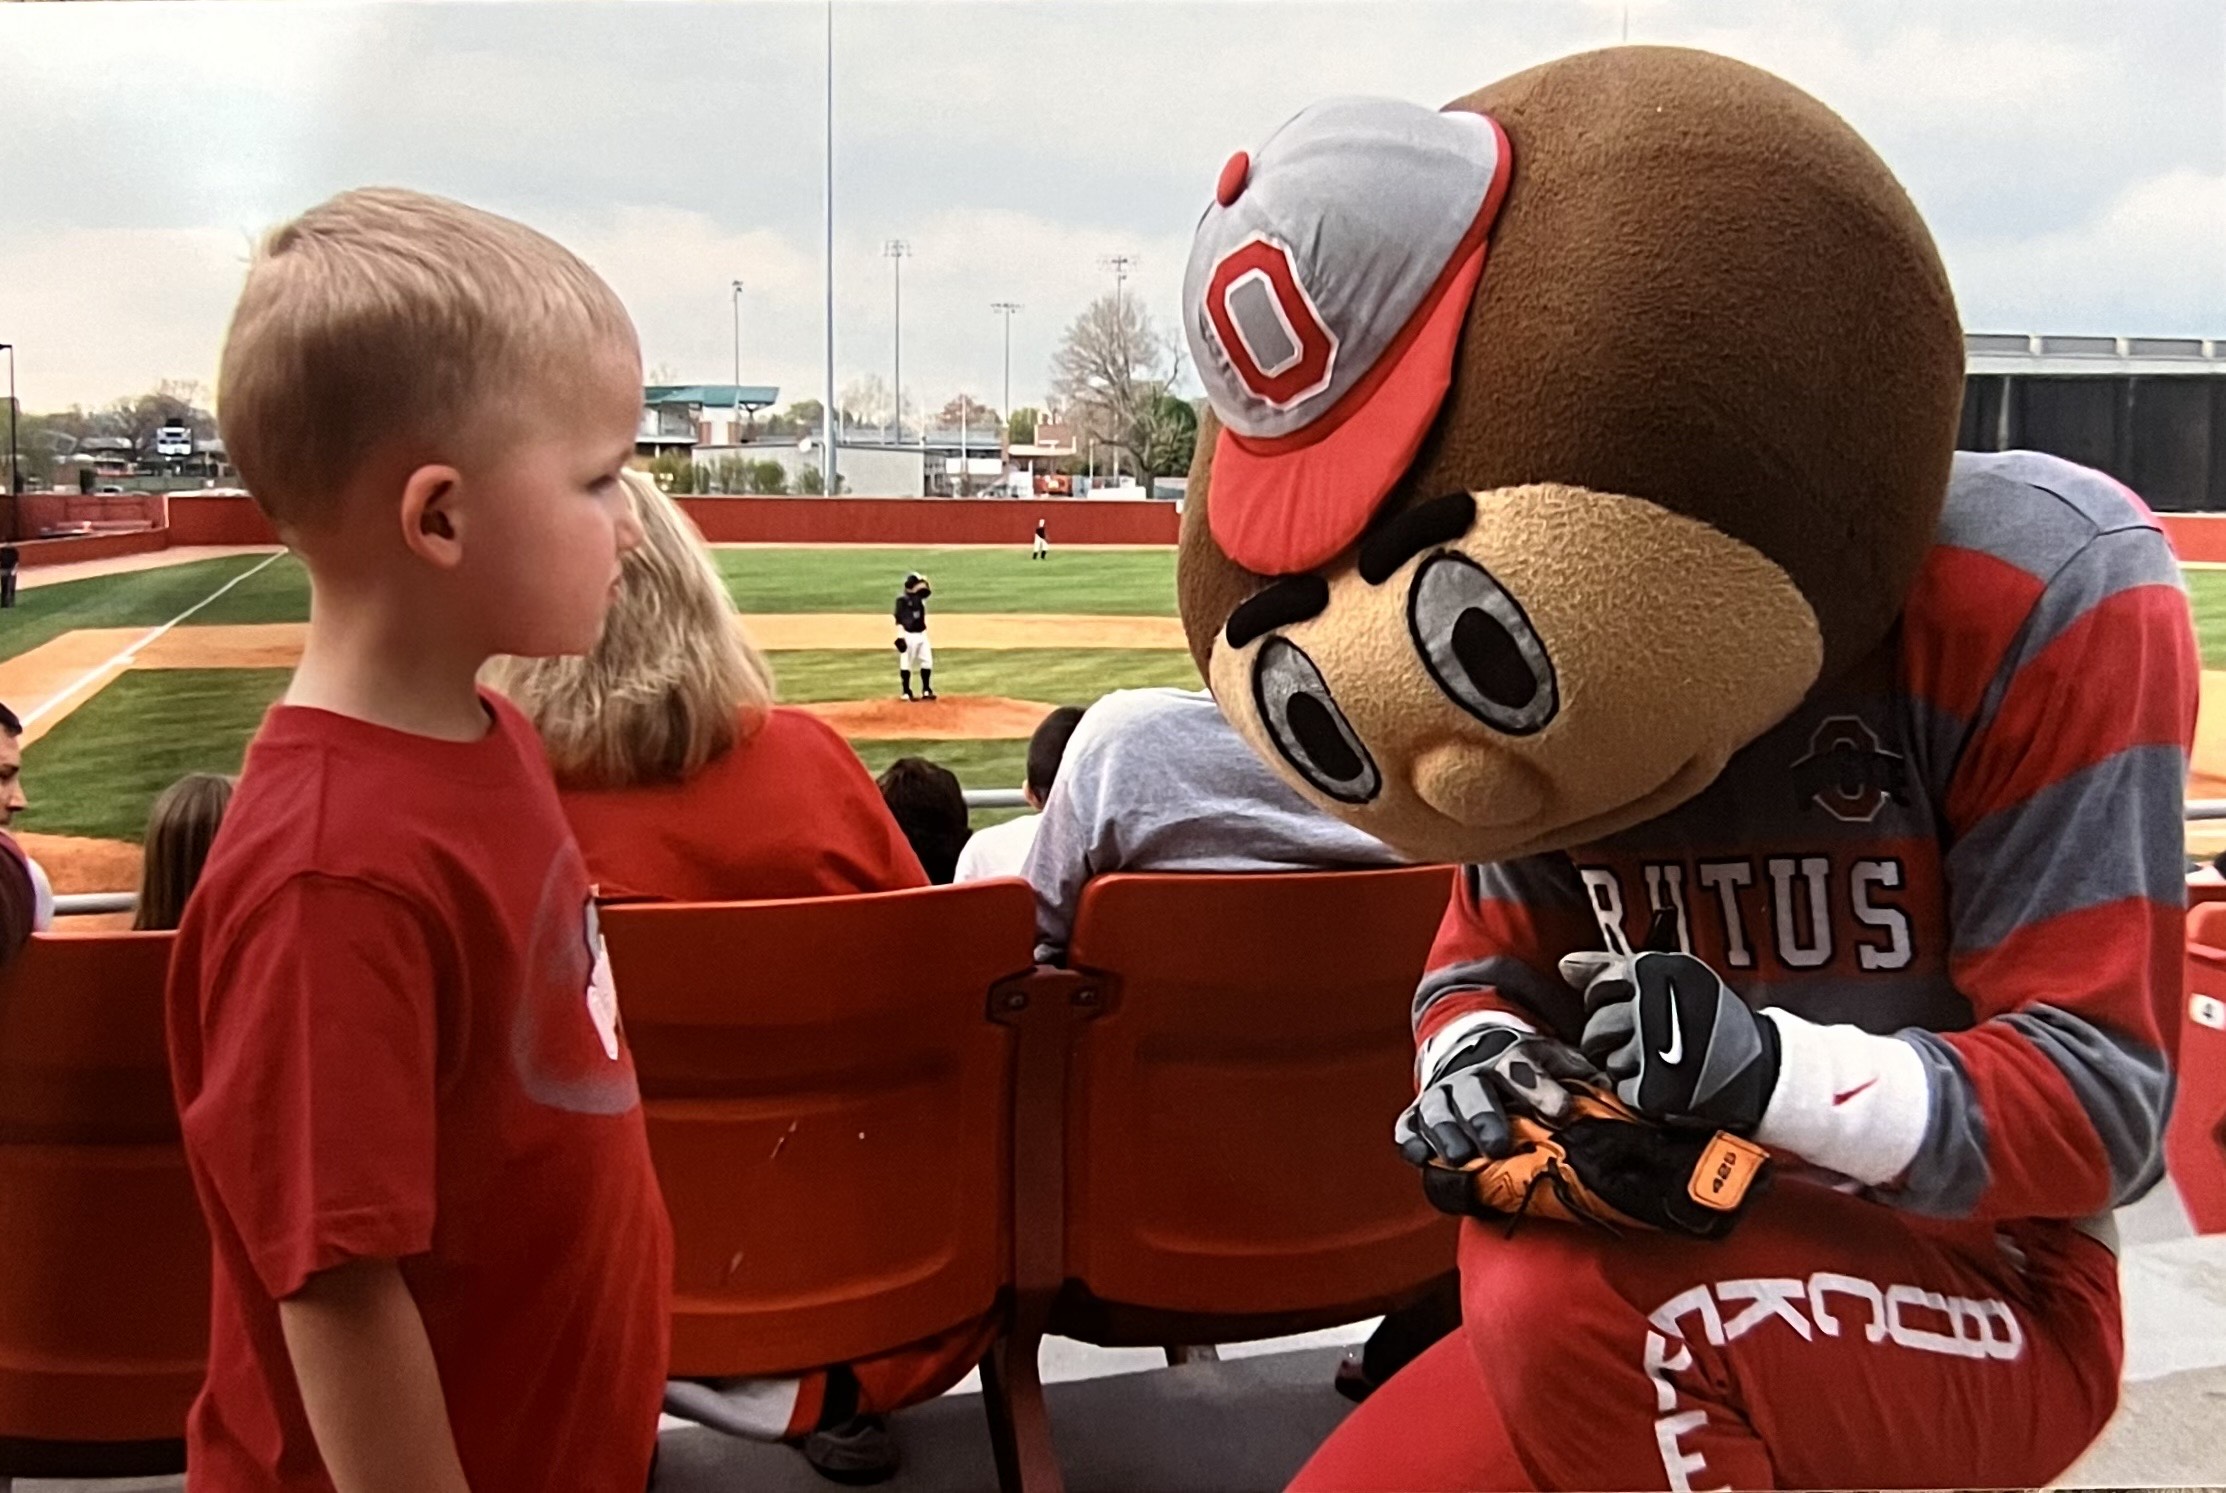 A young Keegan Holmstrom gets an autograph from Brutus at and Ohio State University baseball game (Photo provided by Keegan Holmstrom)